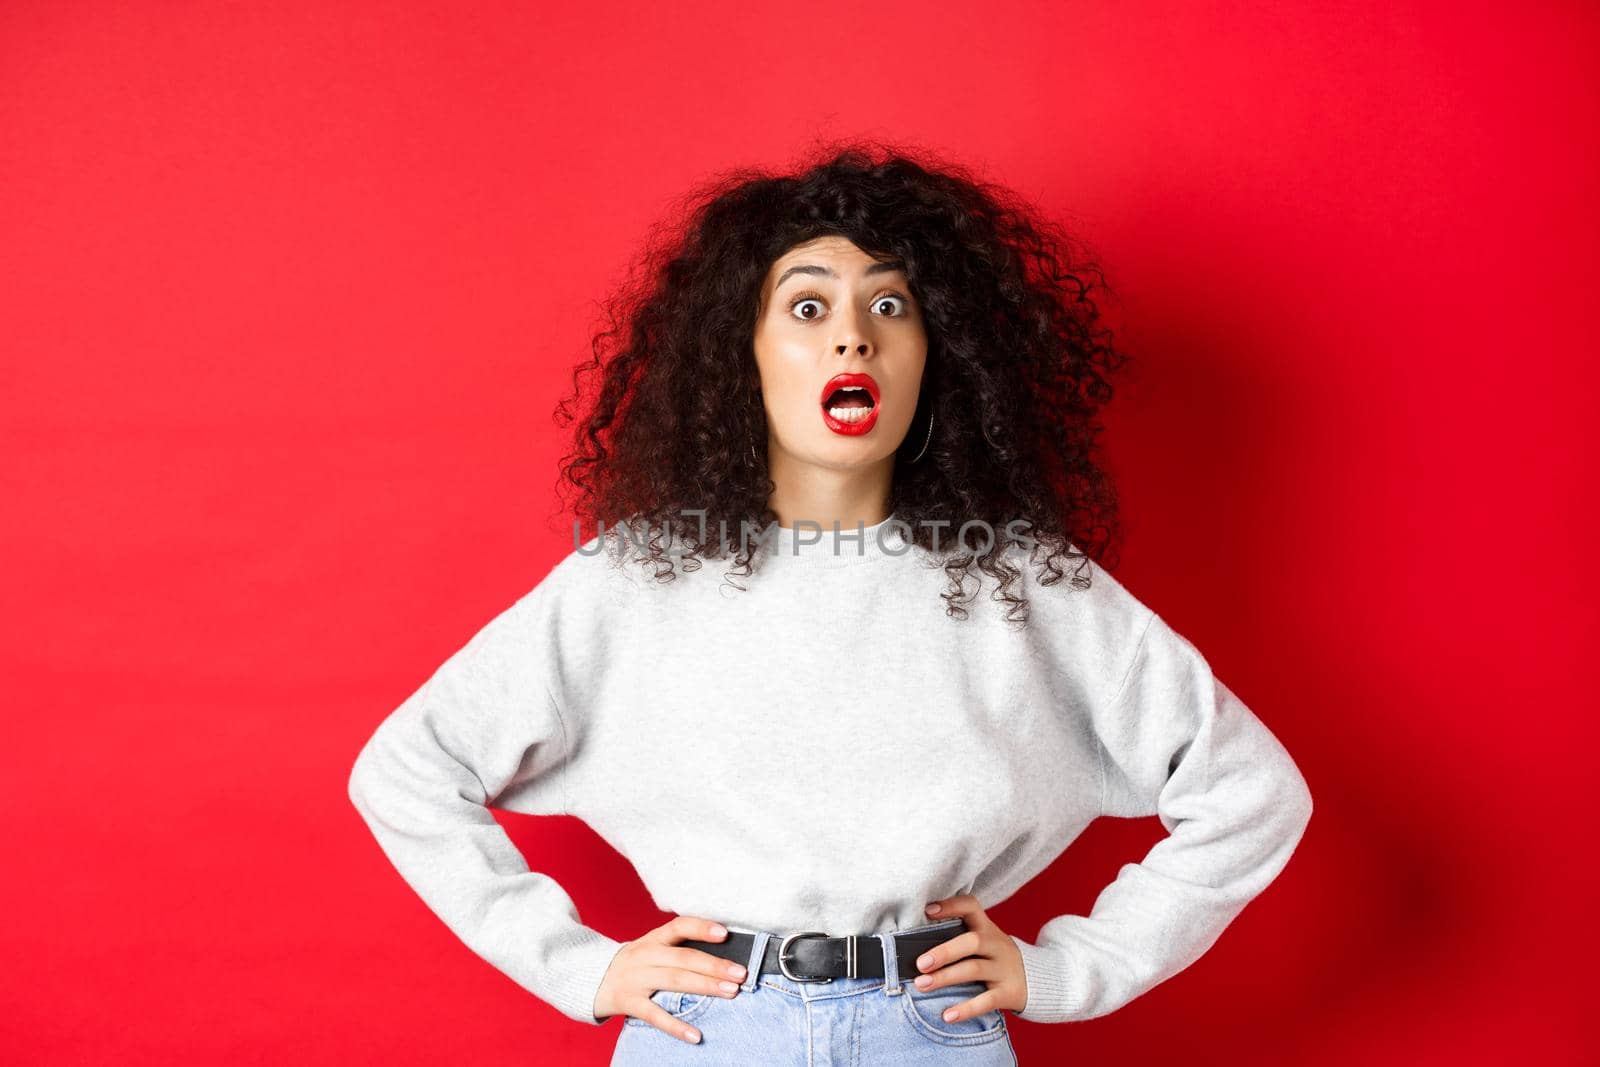 Shocked italian woman with curly hair, gasping and staring at camera astonished, open mouth, standing in white sweatshirt on red background.